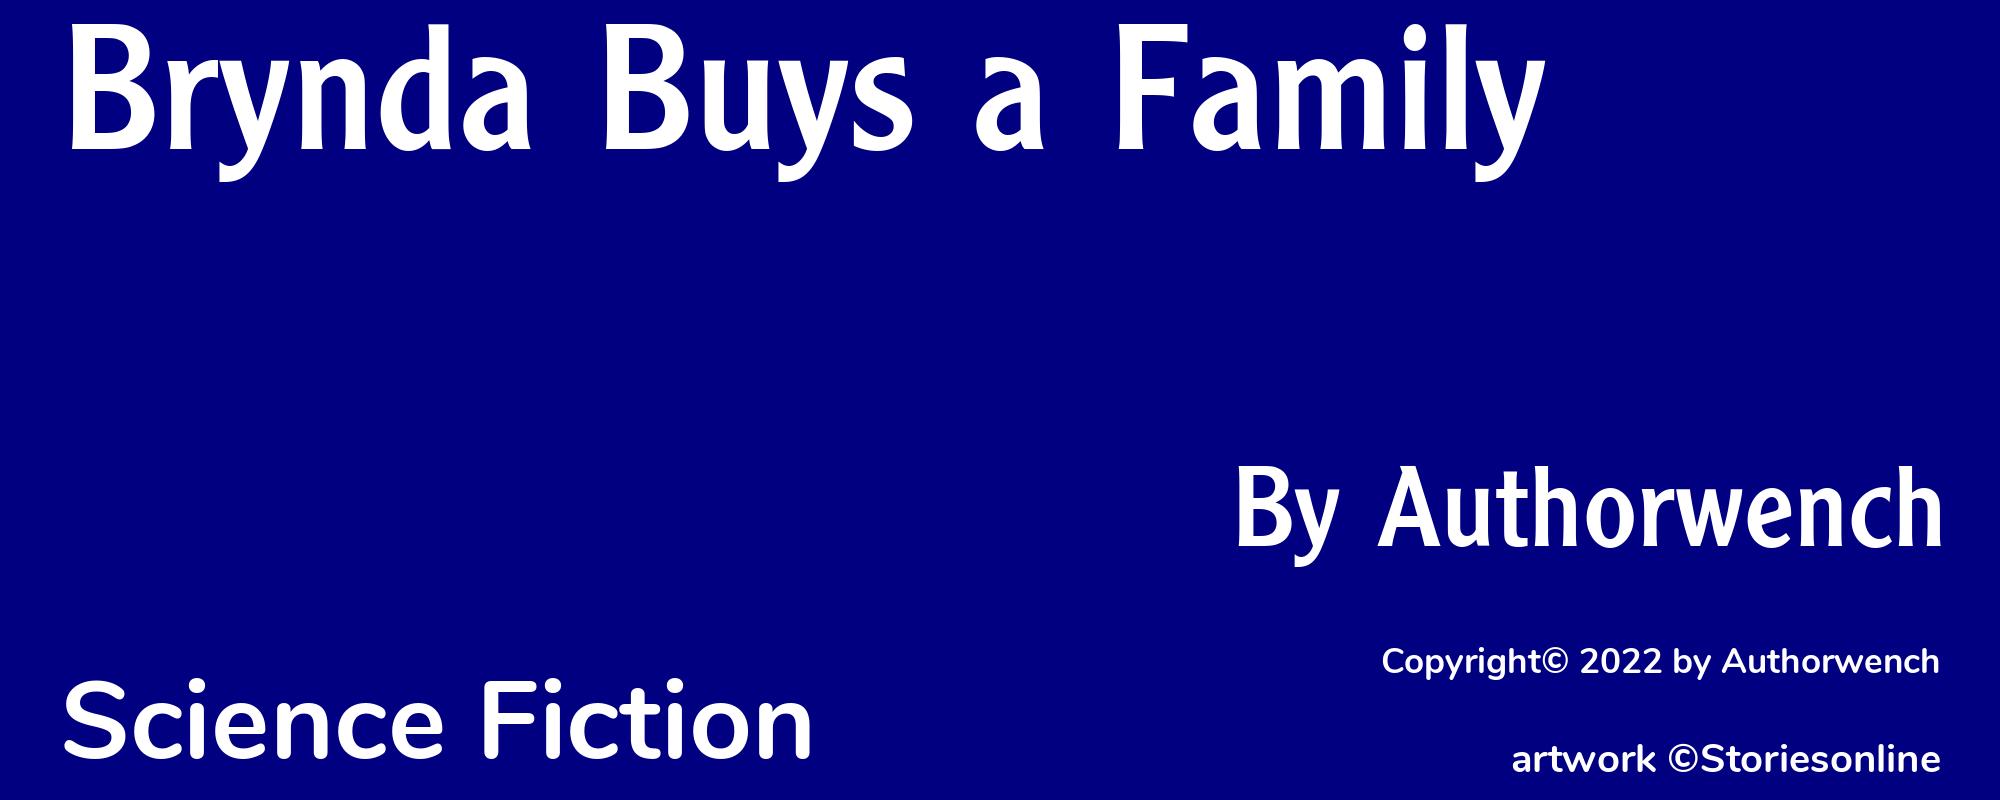 Brynda Buys a Family - Cover